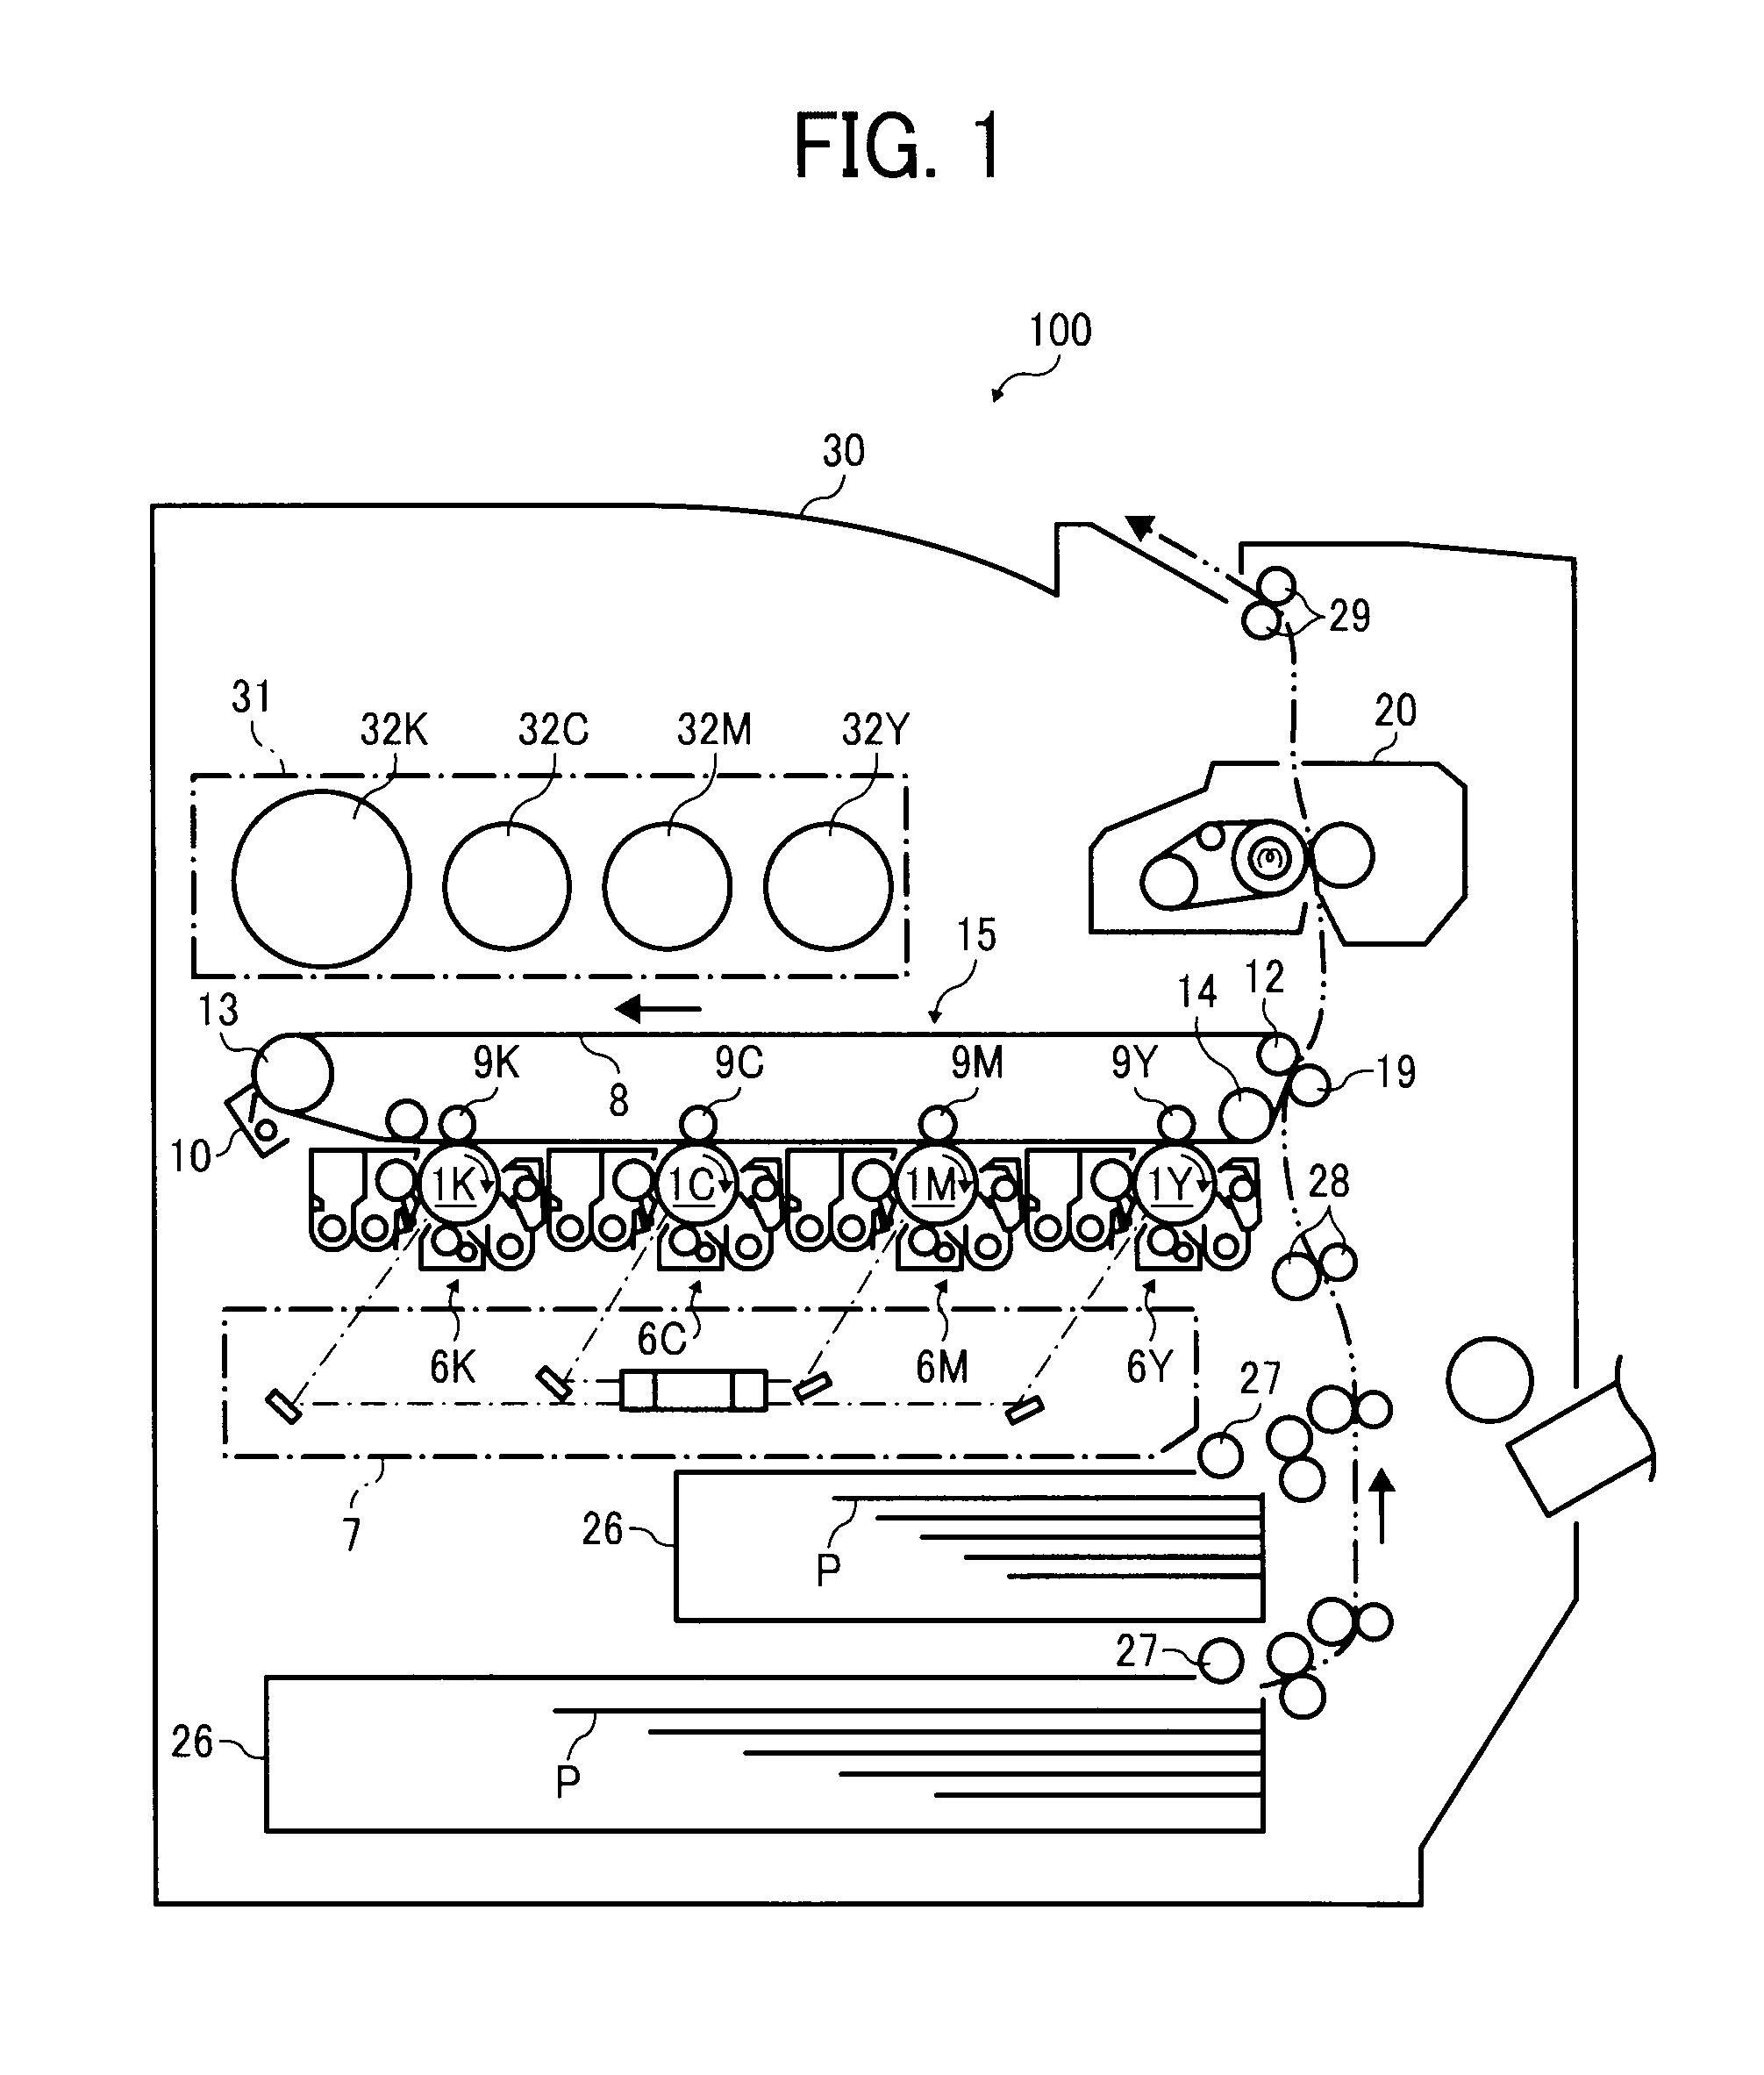 Image forming apparatus and toner cartridge used therein